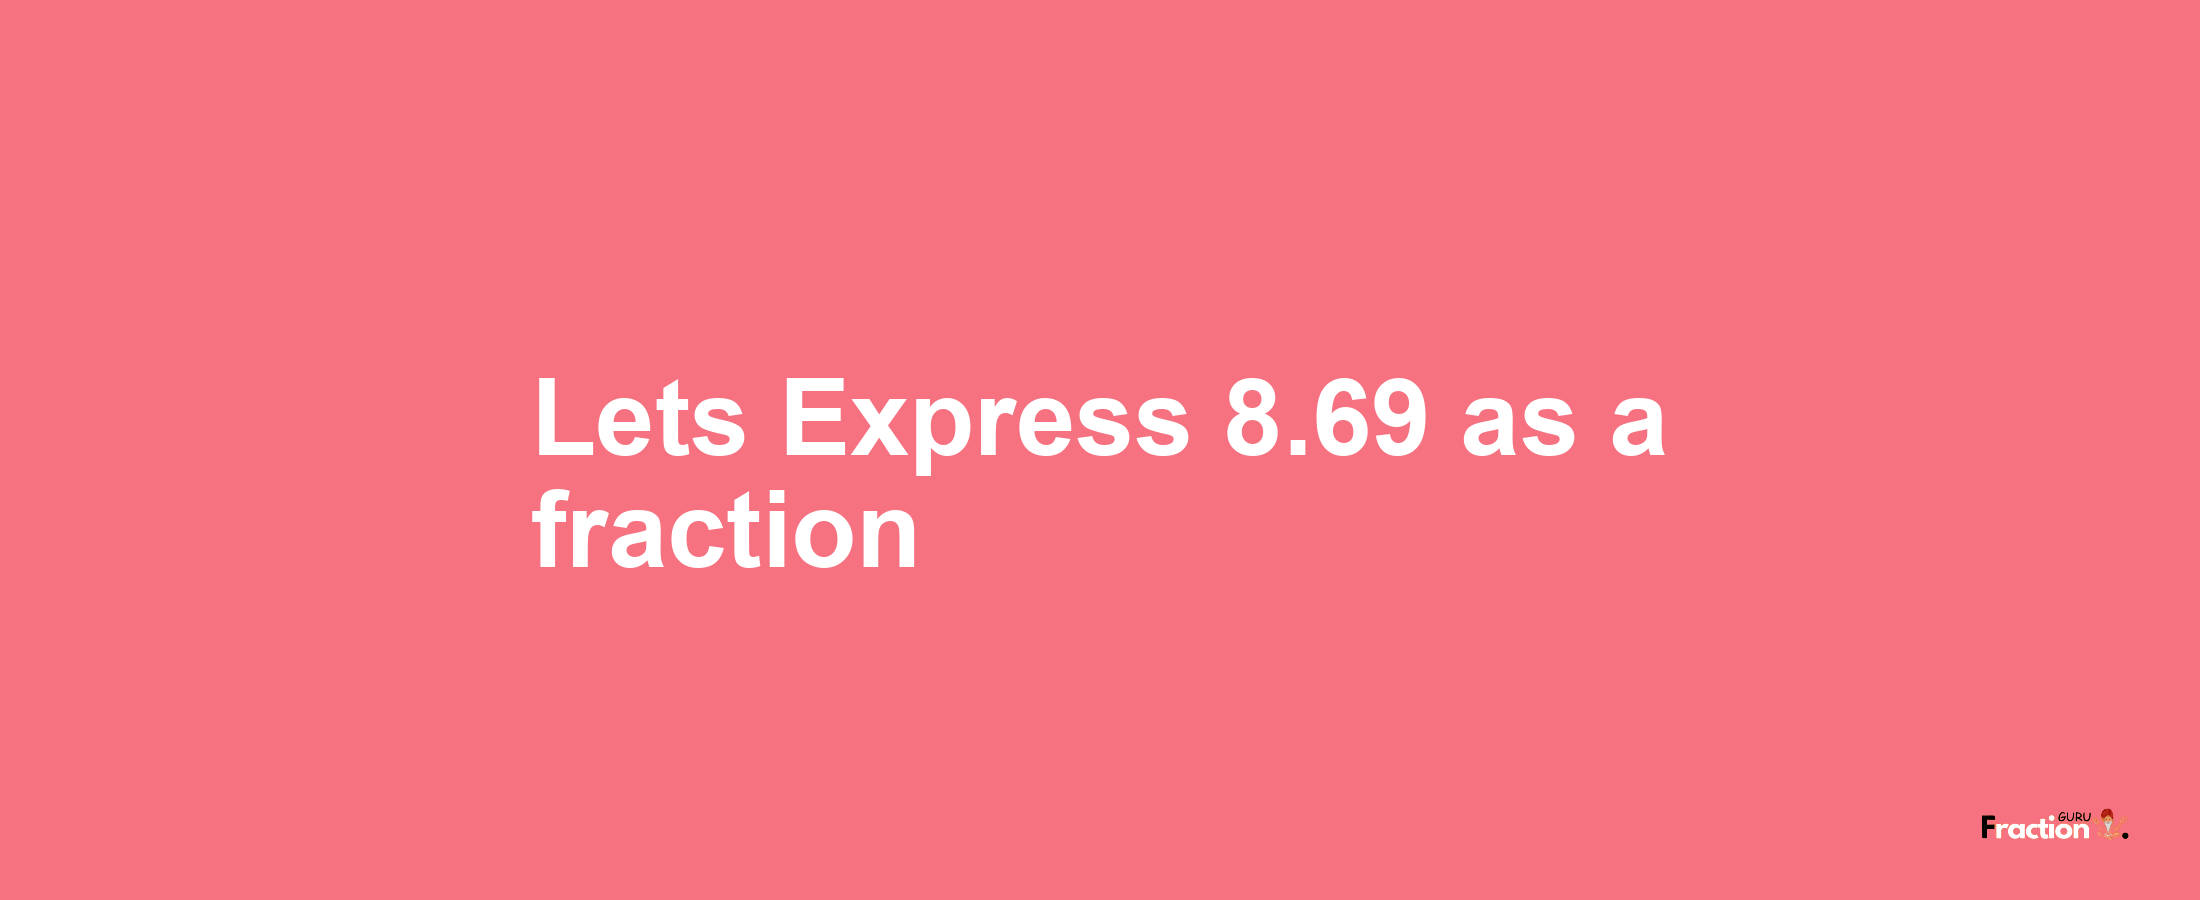 Lets Express 8.69 as afraction